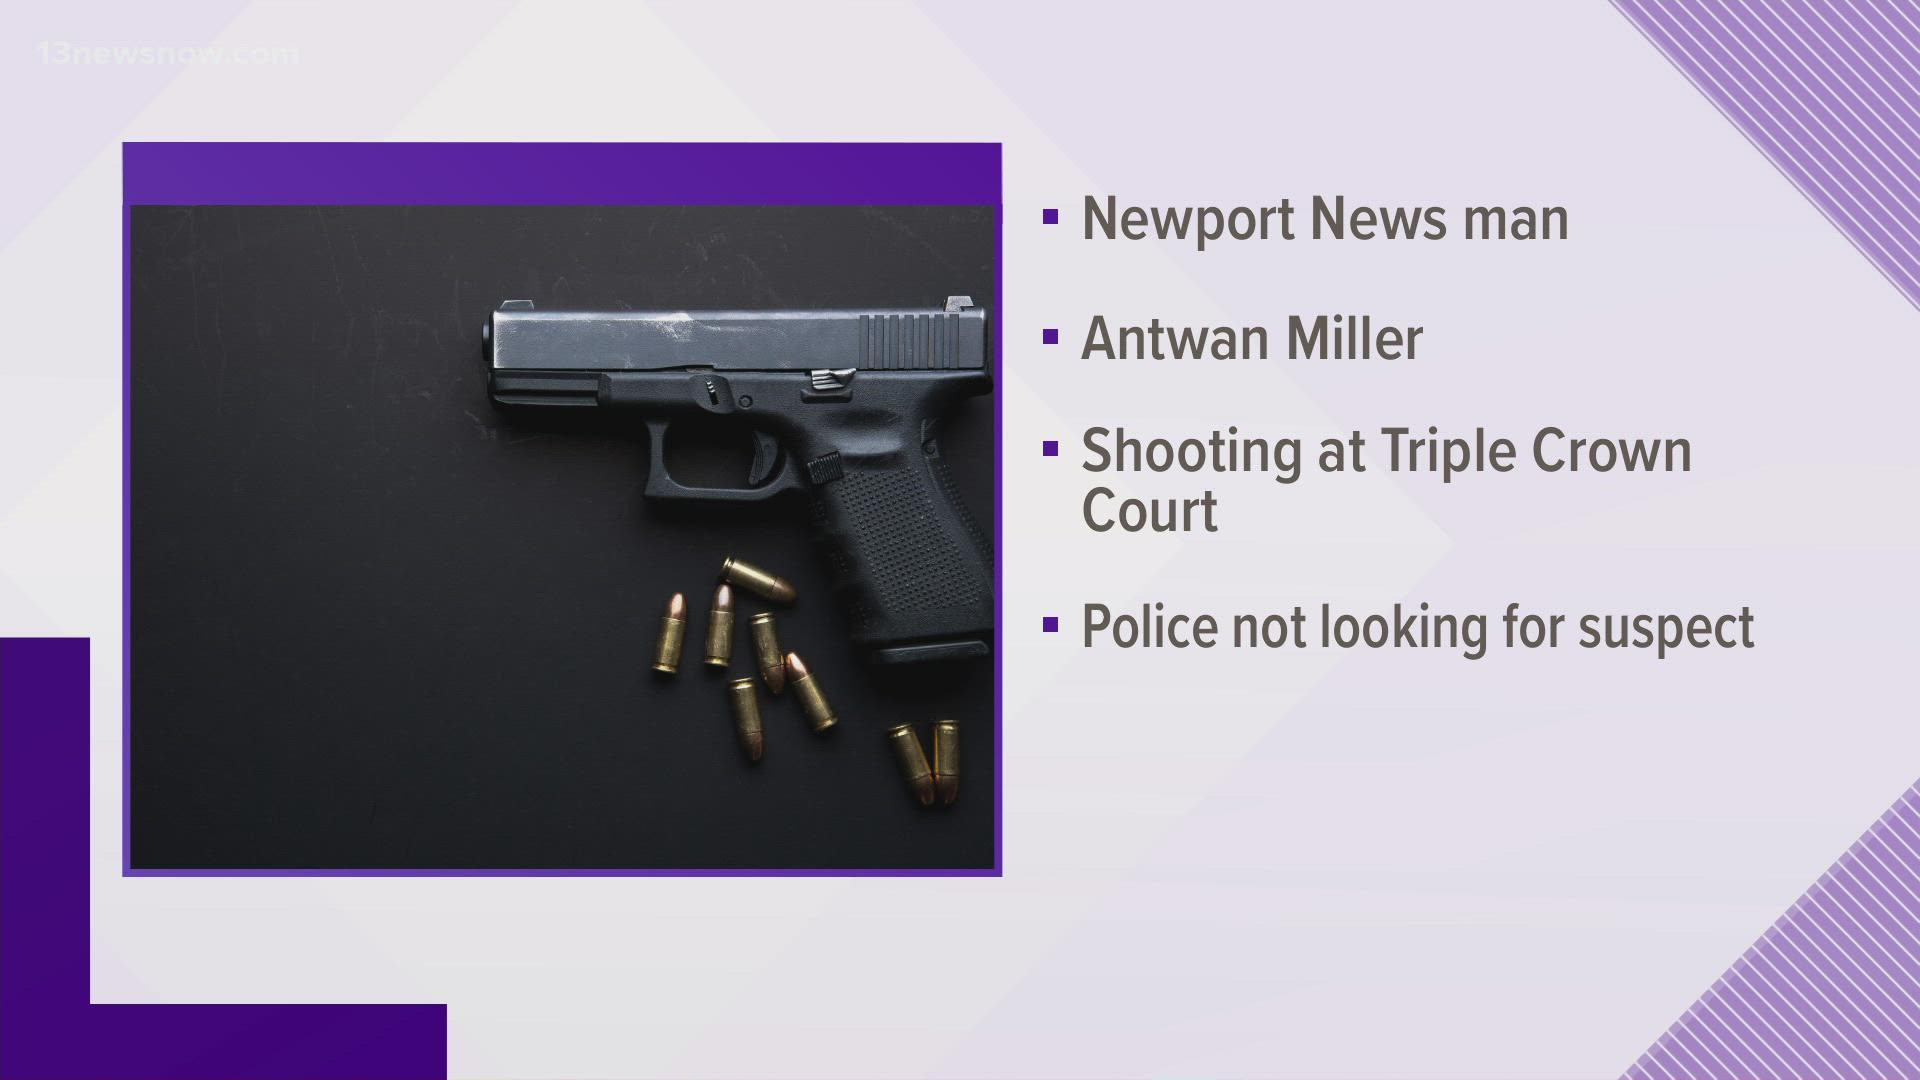 According to Hampton police, Antwan Miller had been in a confrontation with another person at the apartment complex, which resulted in the fatal shooting.